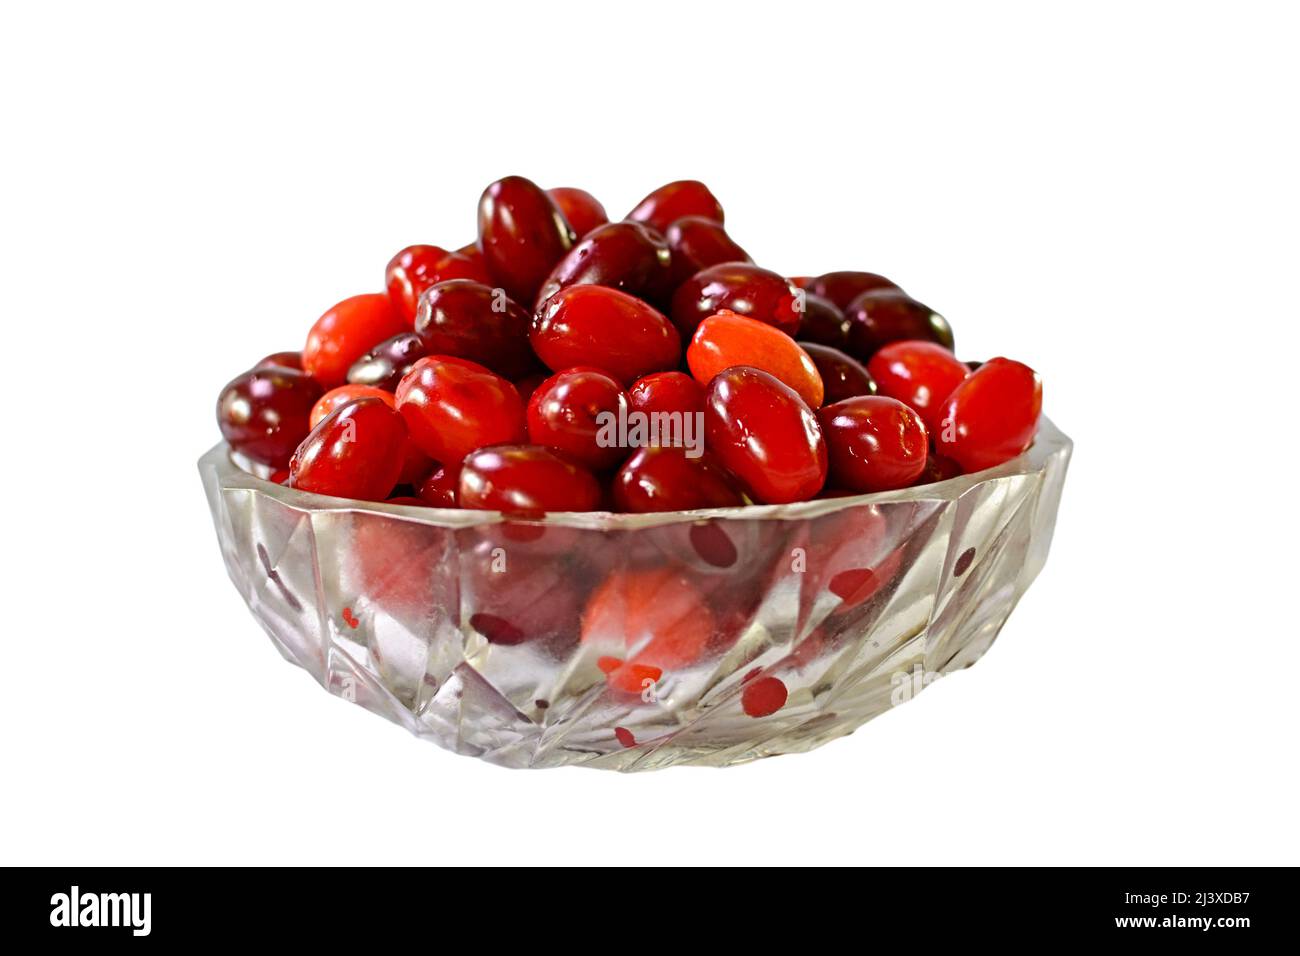 Ripe berries of dogwood red in a glass on the isolated background. Side view. Stock Photo